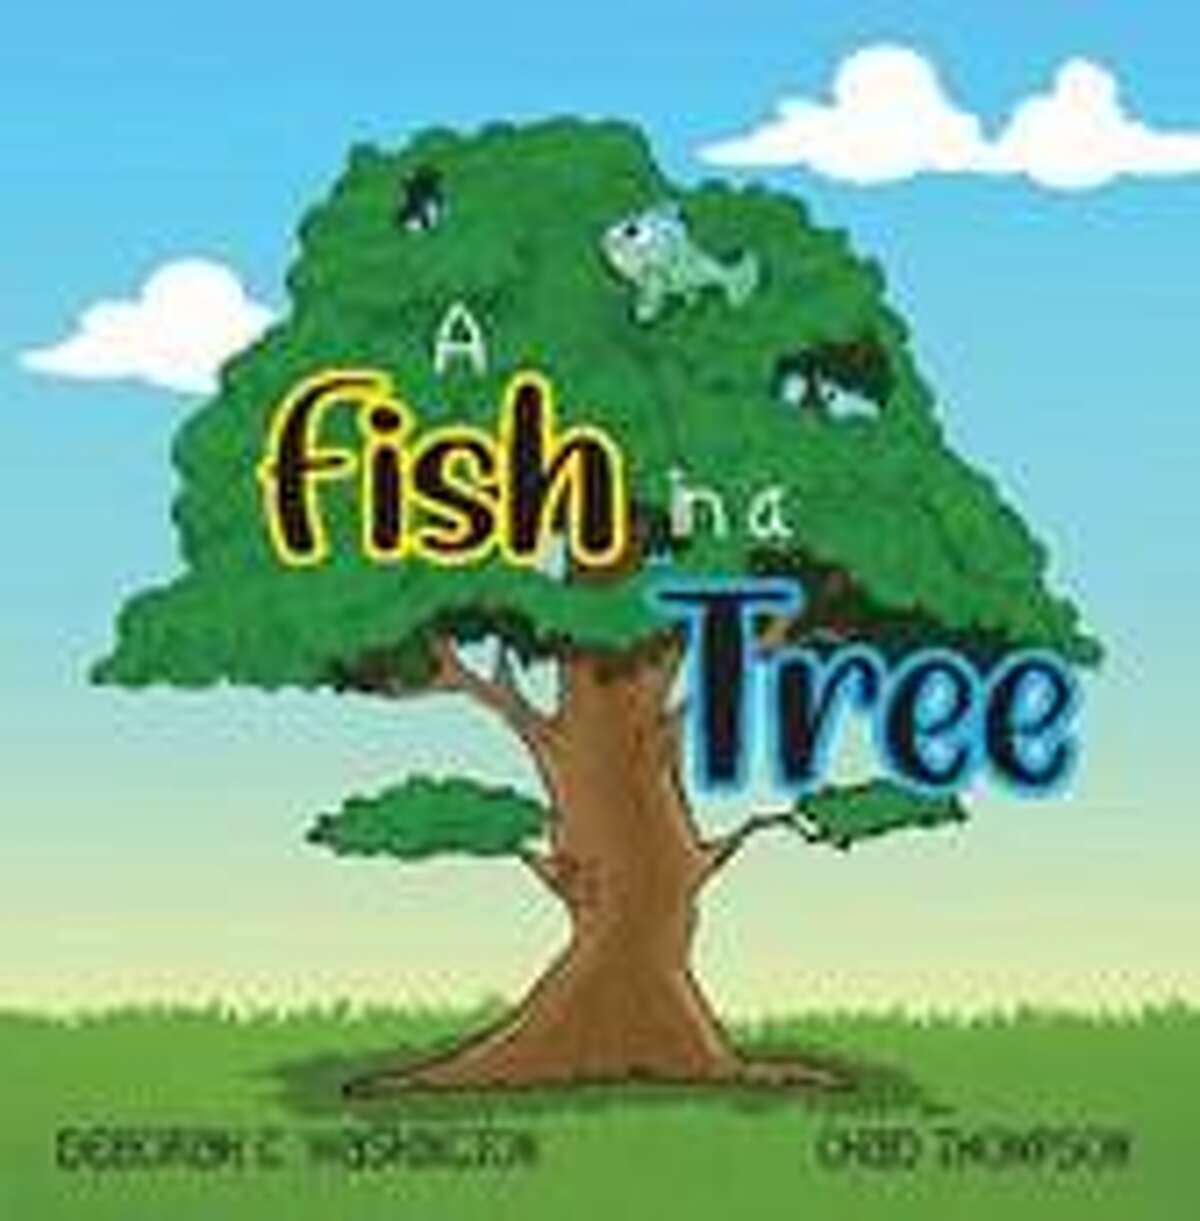 Barkhamsted writer Debbie Washington recently published a children’s book, “A Fish in A Tree.”